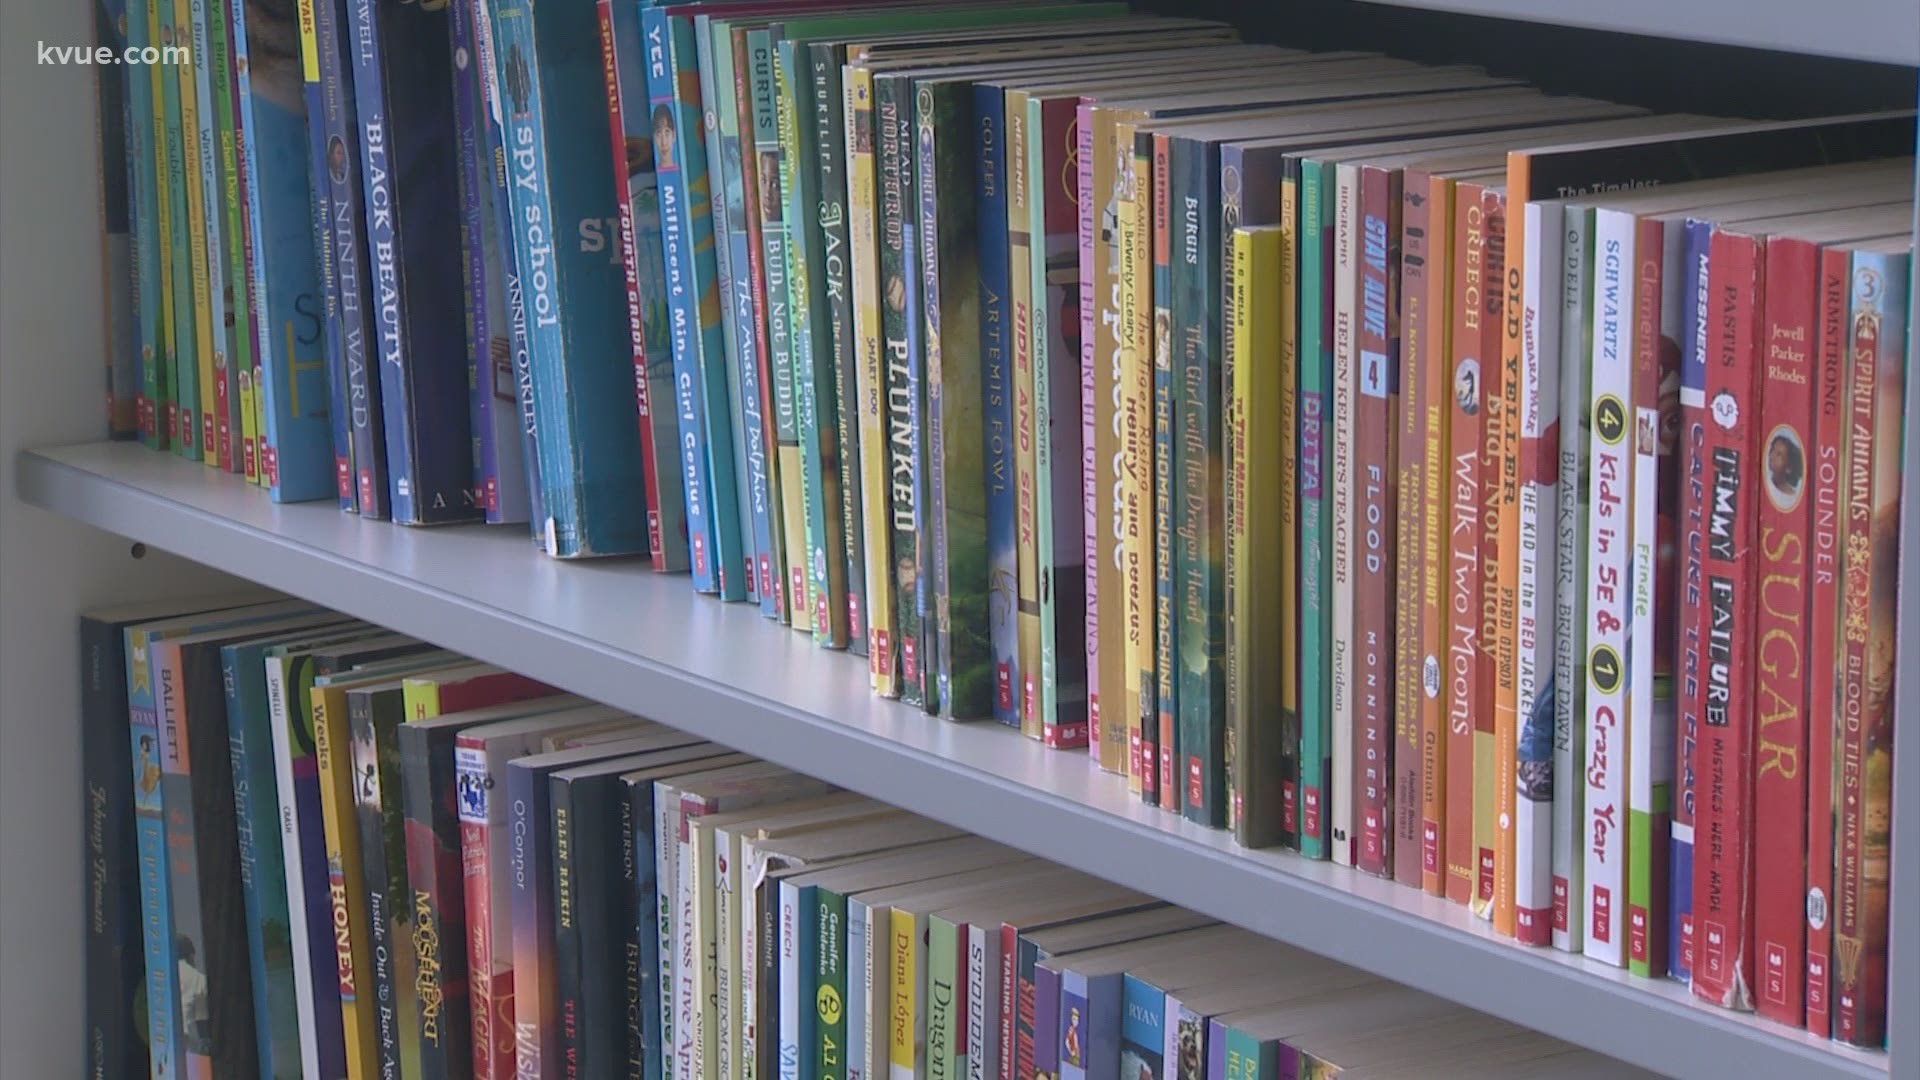 Leander ISD said it removed six books from some student book club lists due to their content.